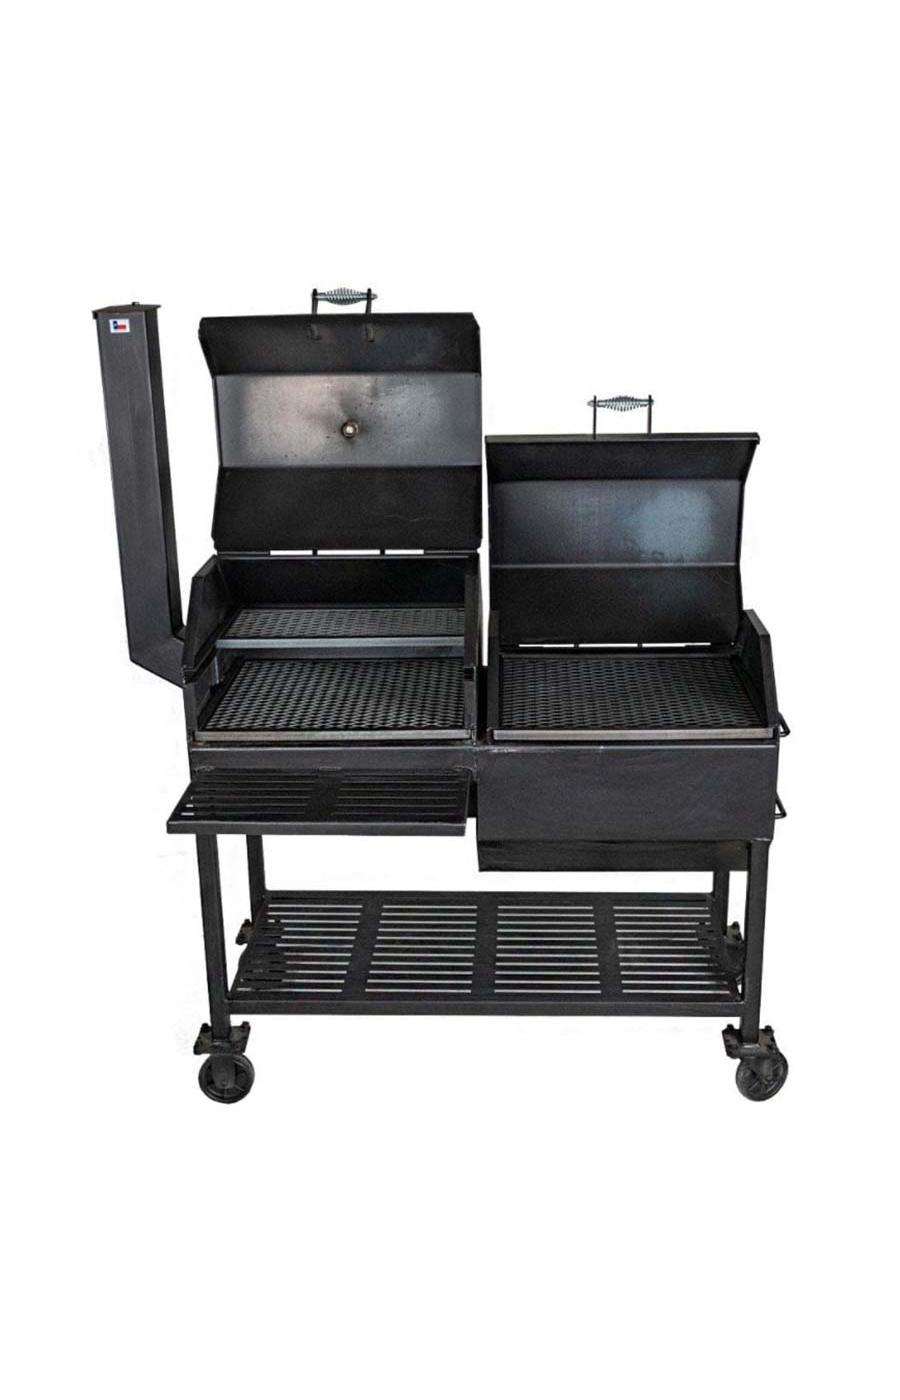 All Seasons Feeders Charcoal BBQ Pit with Firebox; image 6 of 7